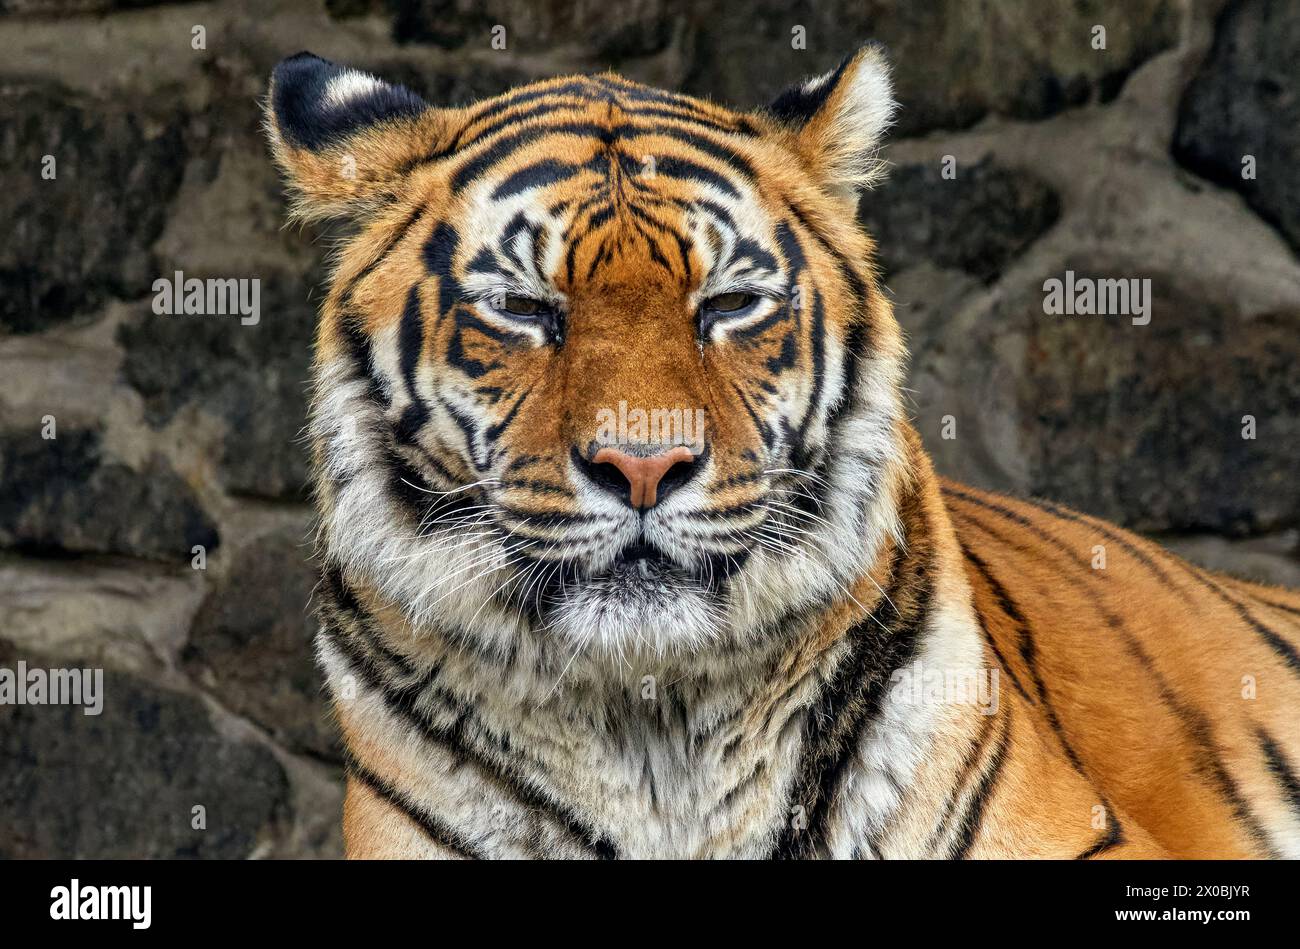 Image of the face of a large striped tiger Stock Photo